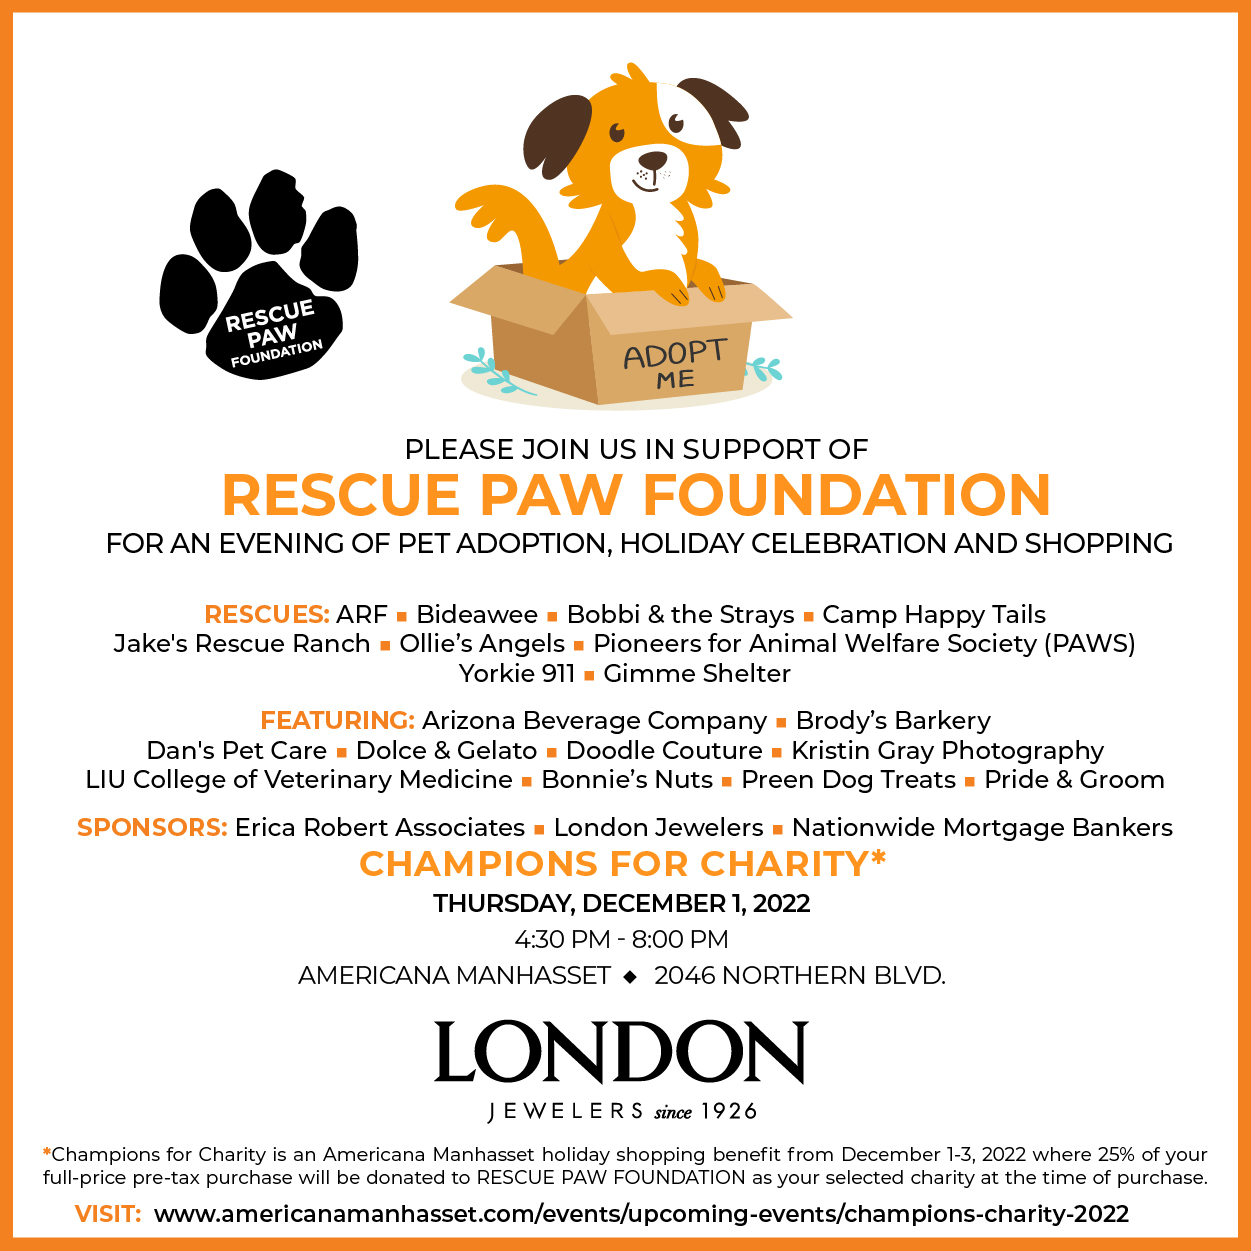 Champions For Charity | Animal Rescue Fund of the Hamptons